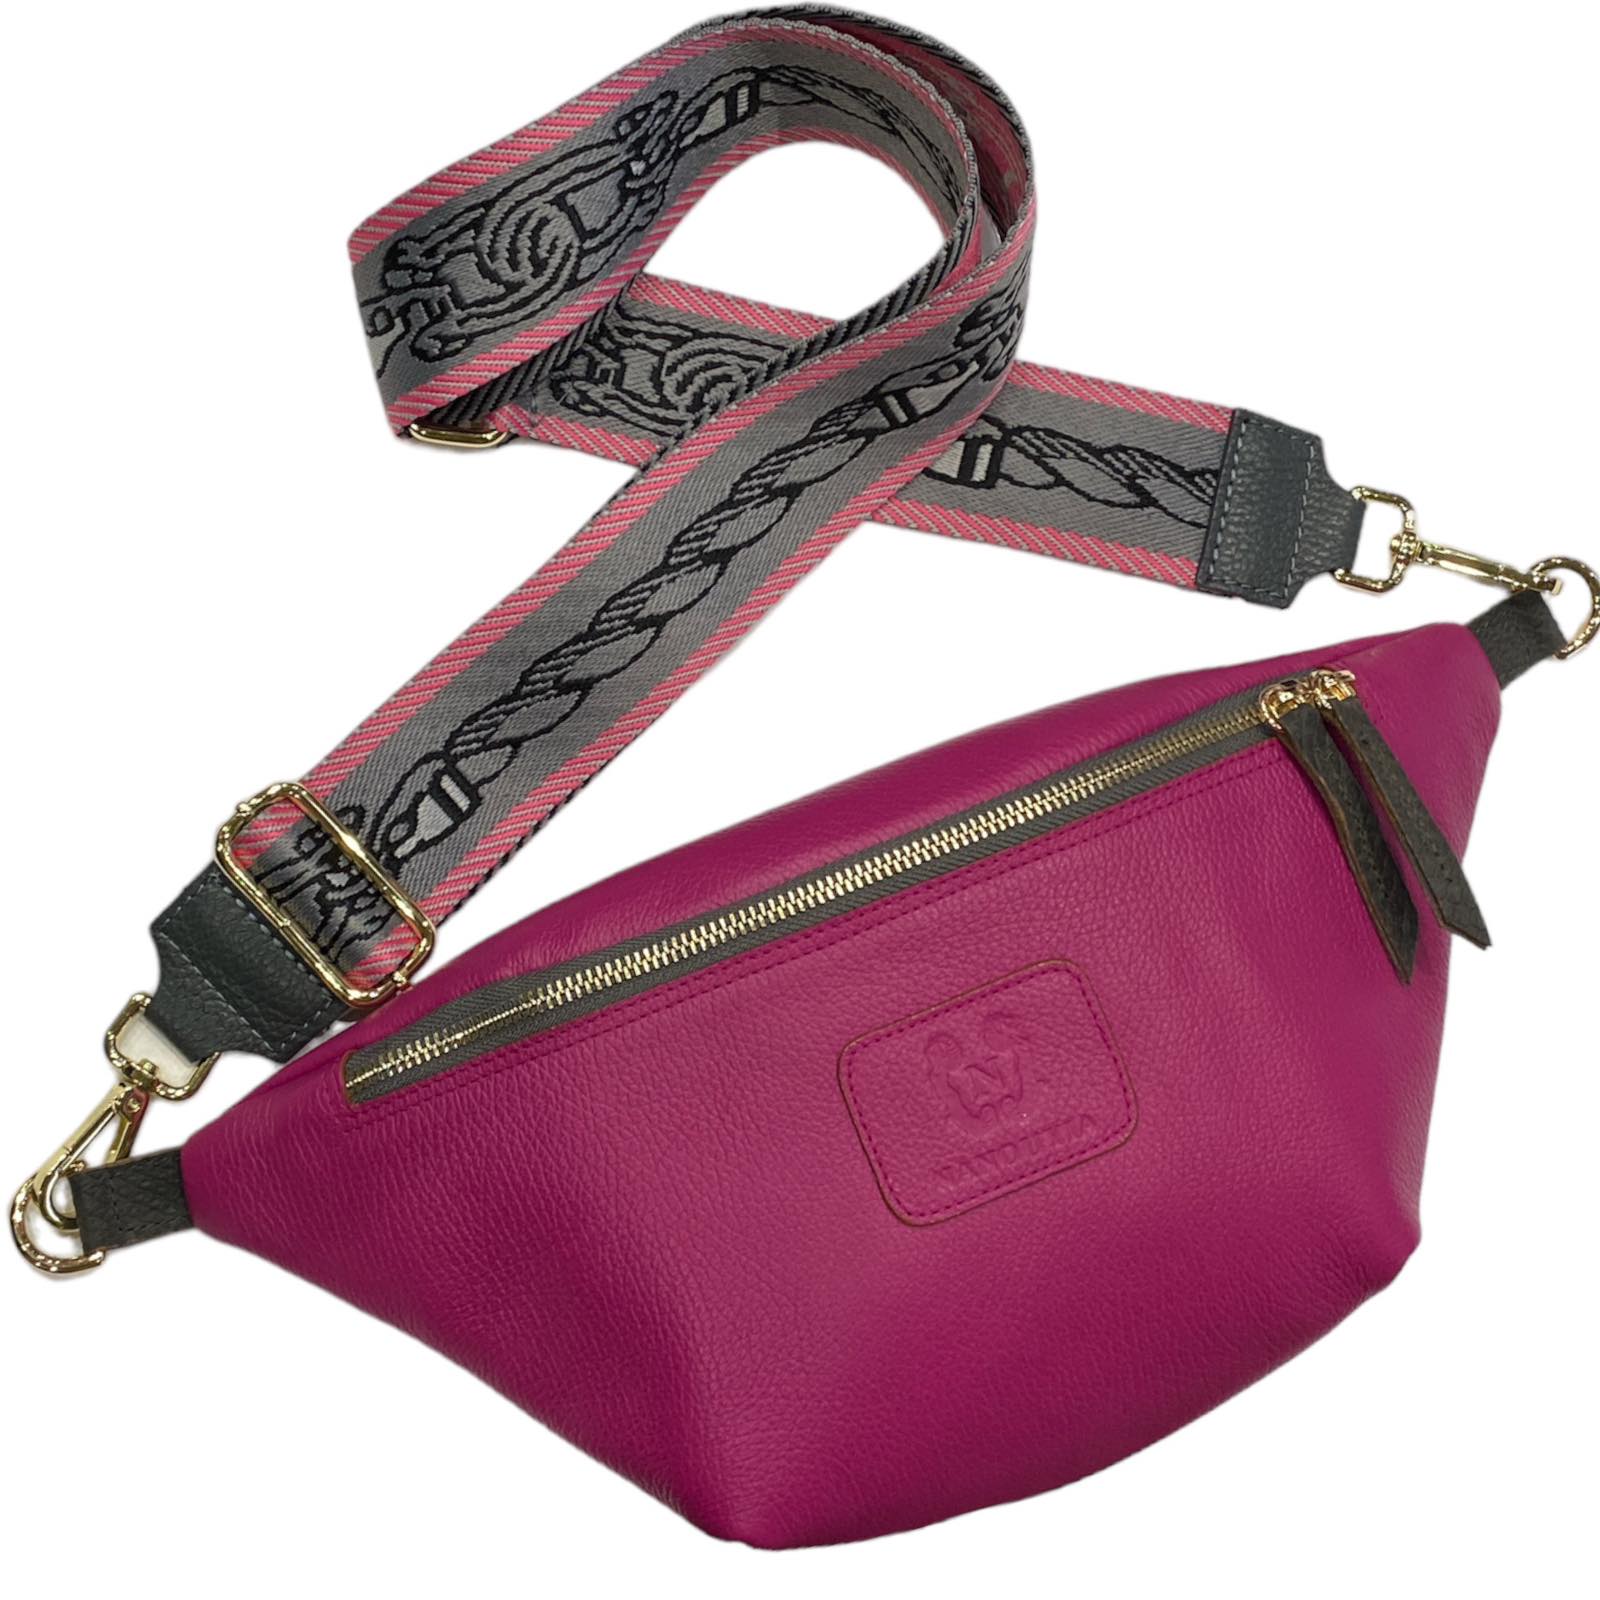 Strong pink leather belt bag with grey details